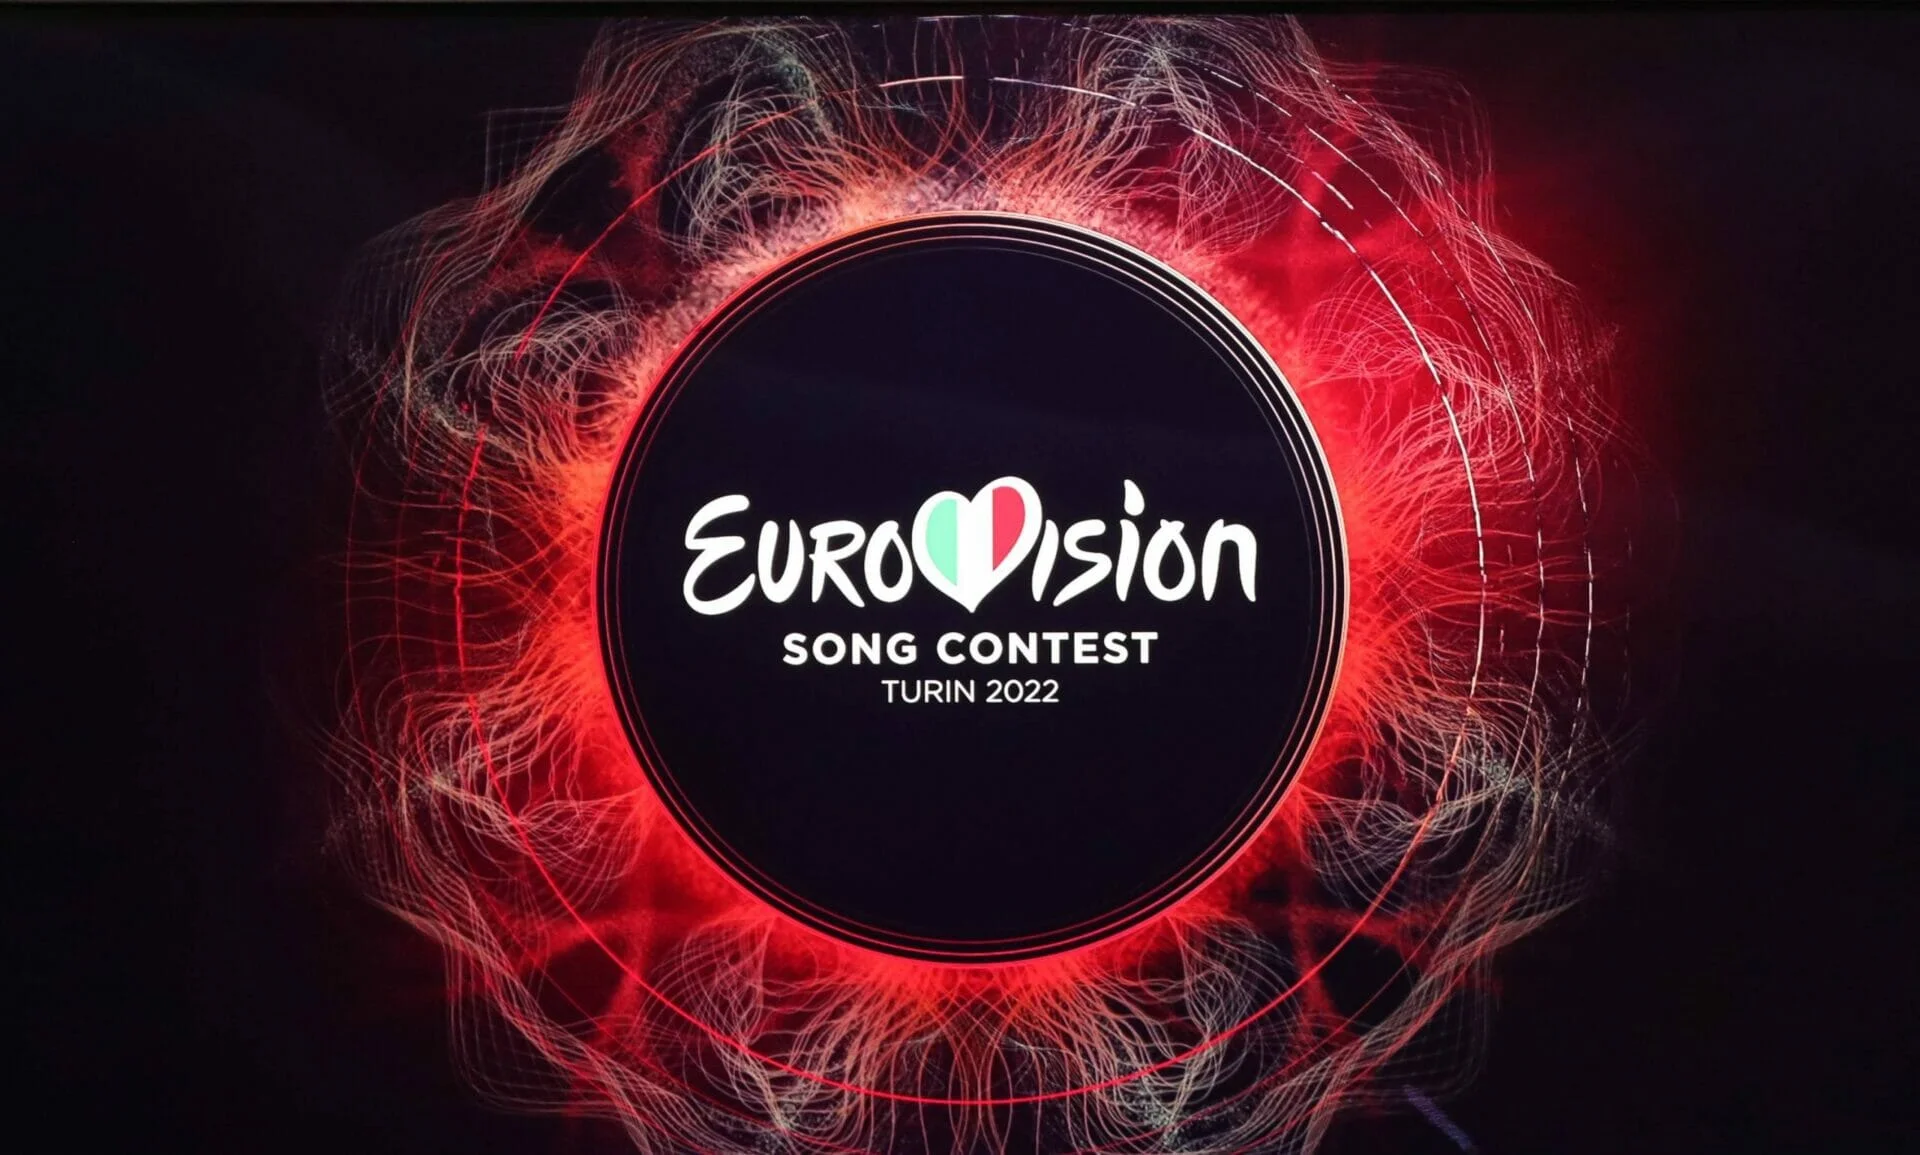 Eurovision Song Contest 2022 | The game is on